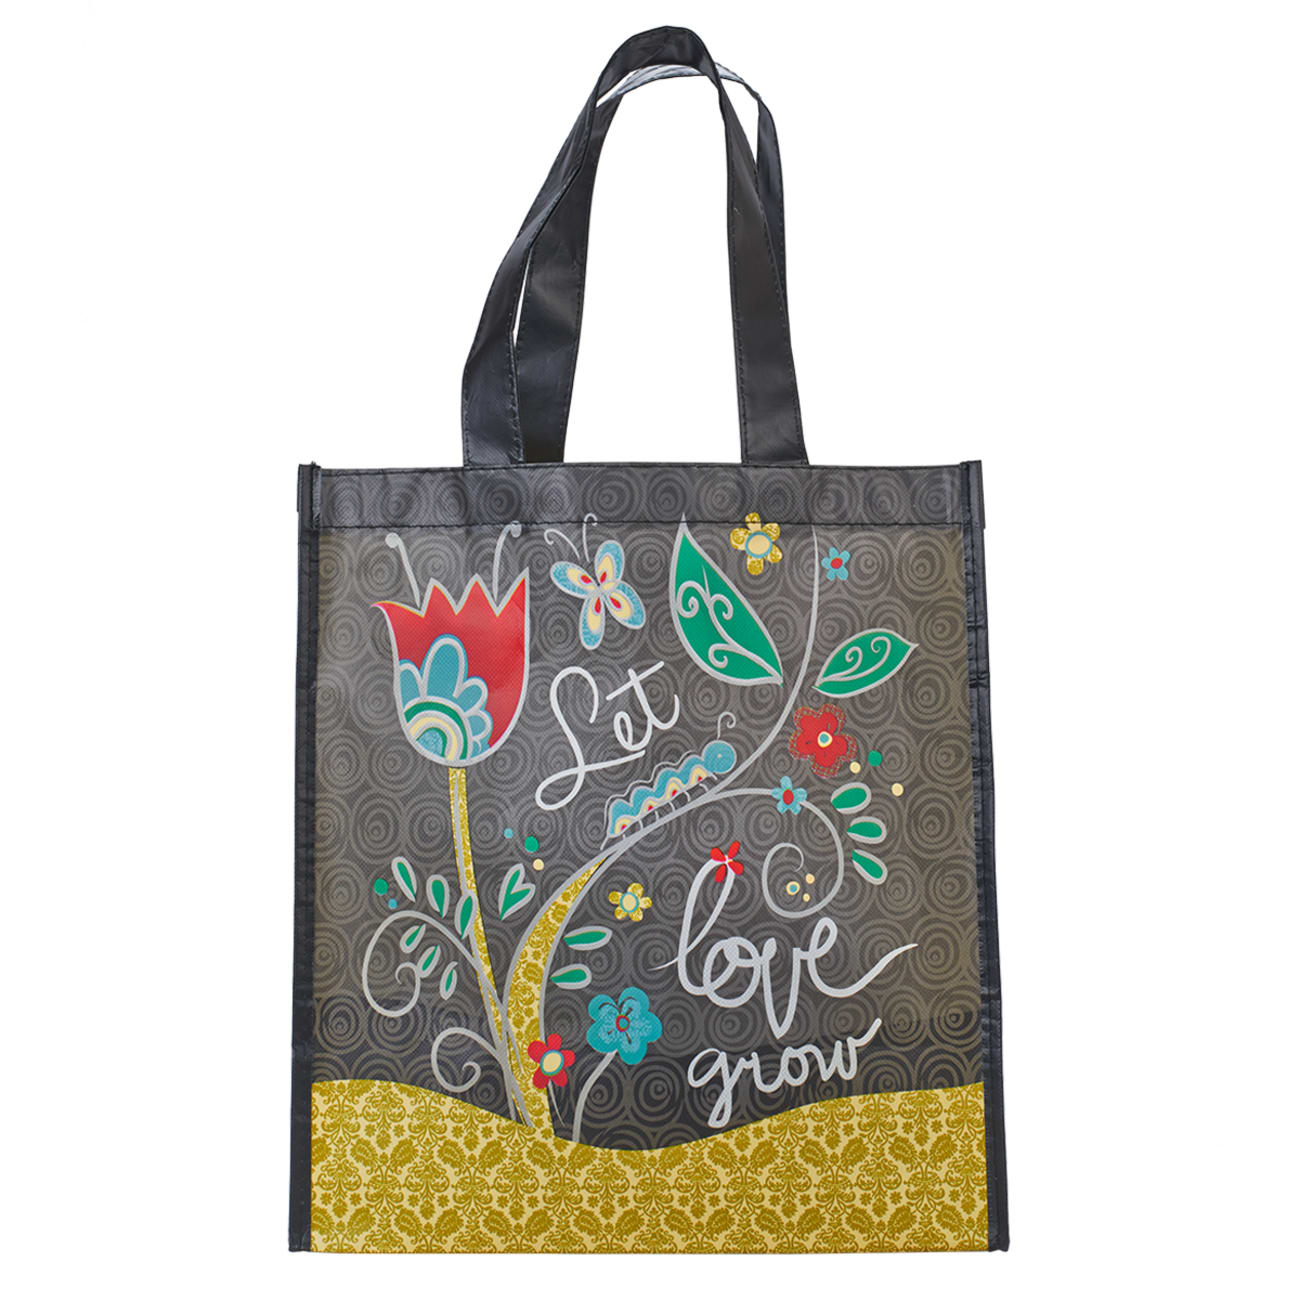 Non-Woven Tote Bag: Love One Another Deeply Soft Goods